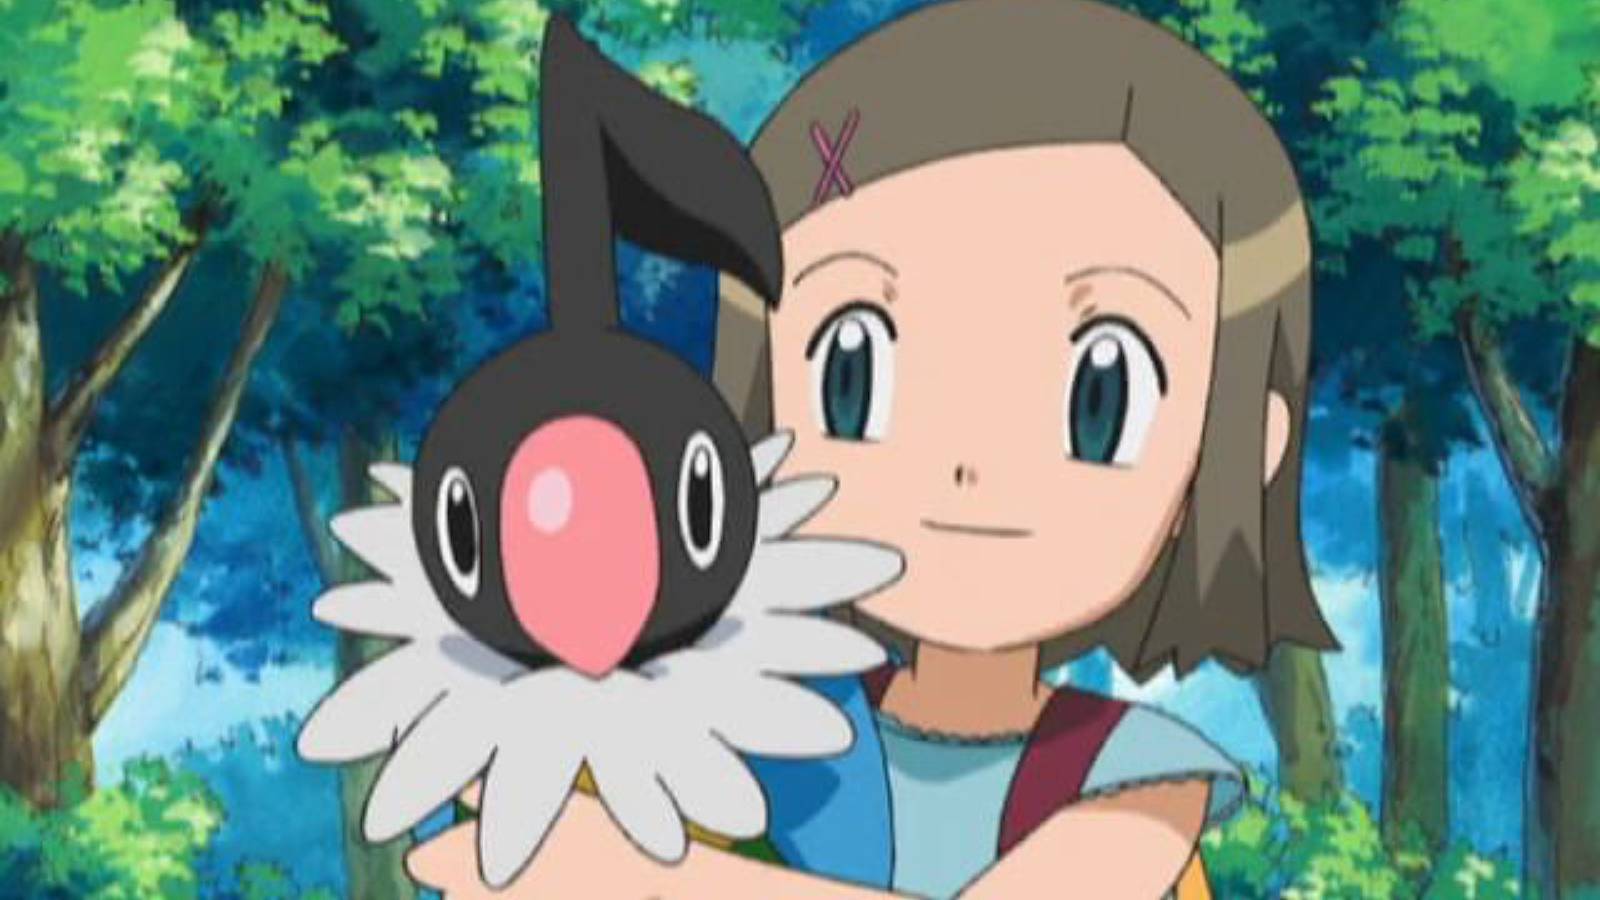 A screenshot from the Pokemon anime shows a young girl holding a Chatot